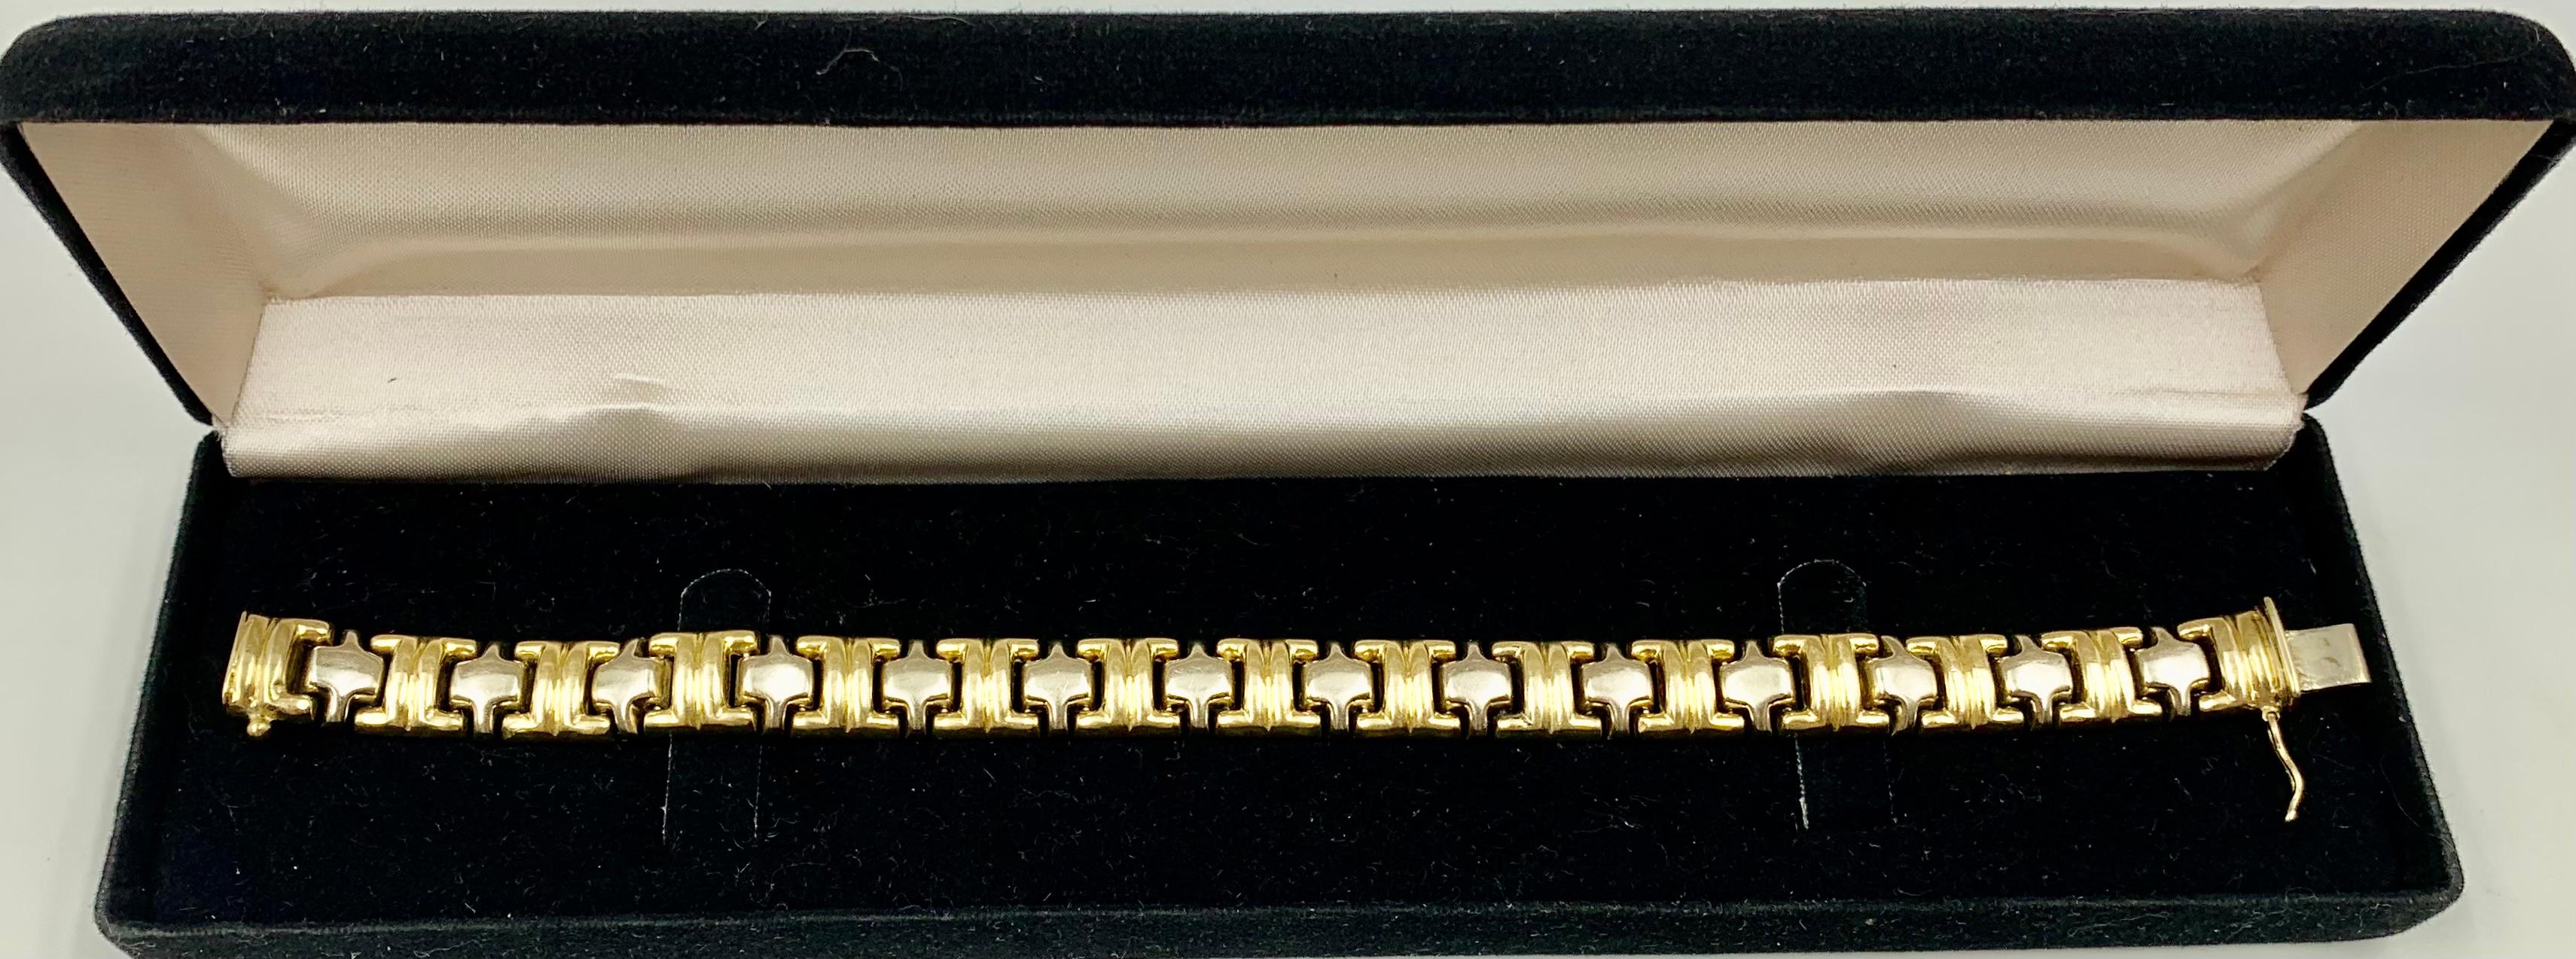 Beautiful craftsmanship, two color yellow and white 14K gold Parentesi style link bracelet.
Handcrafted, classic seamless fit. Excellent alone and as a layering bracelet, especially with another chain link bracelet or a diamond tennis bracelet. The